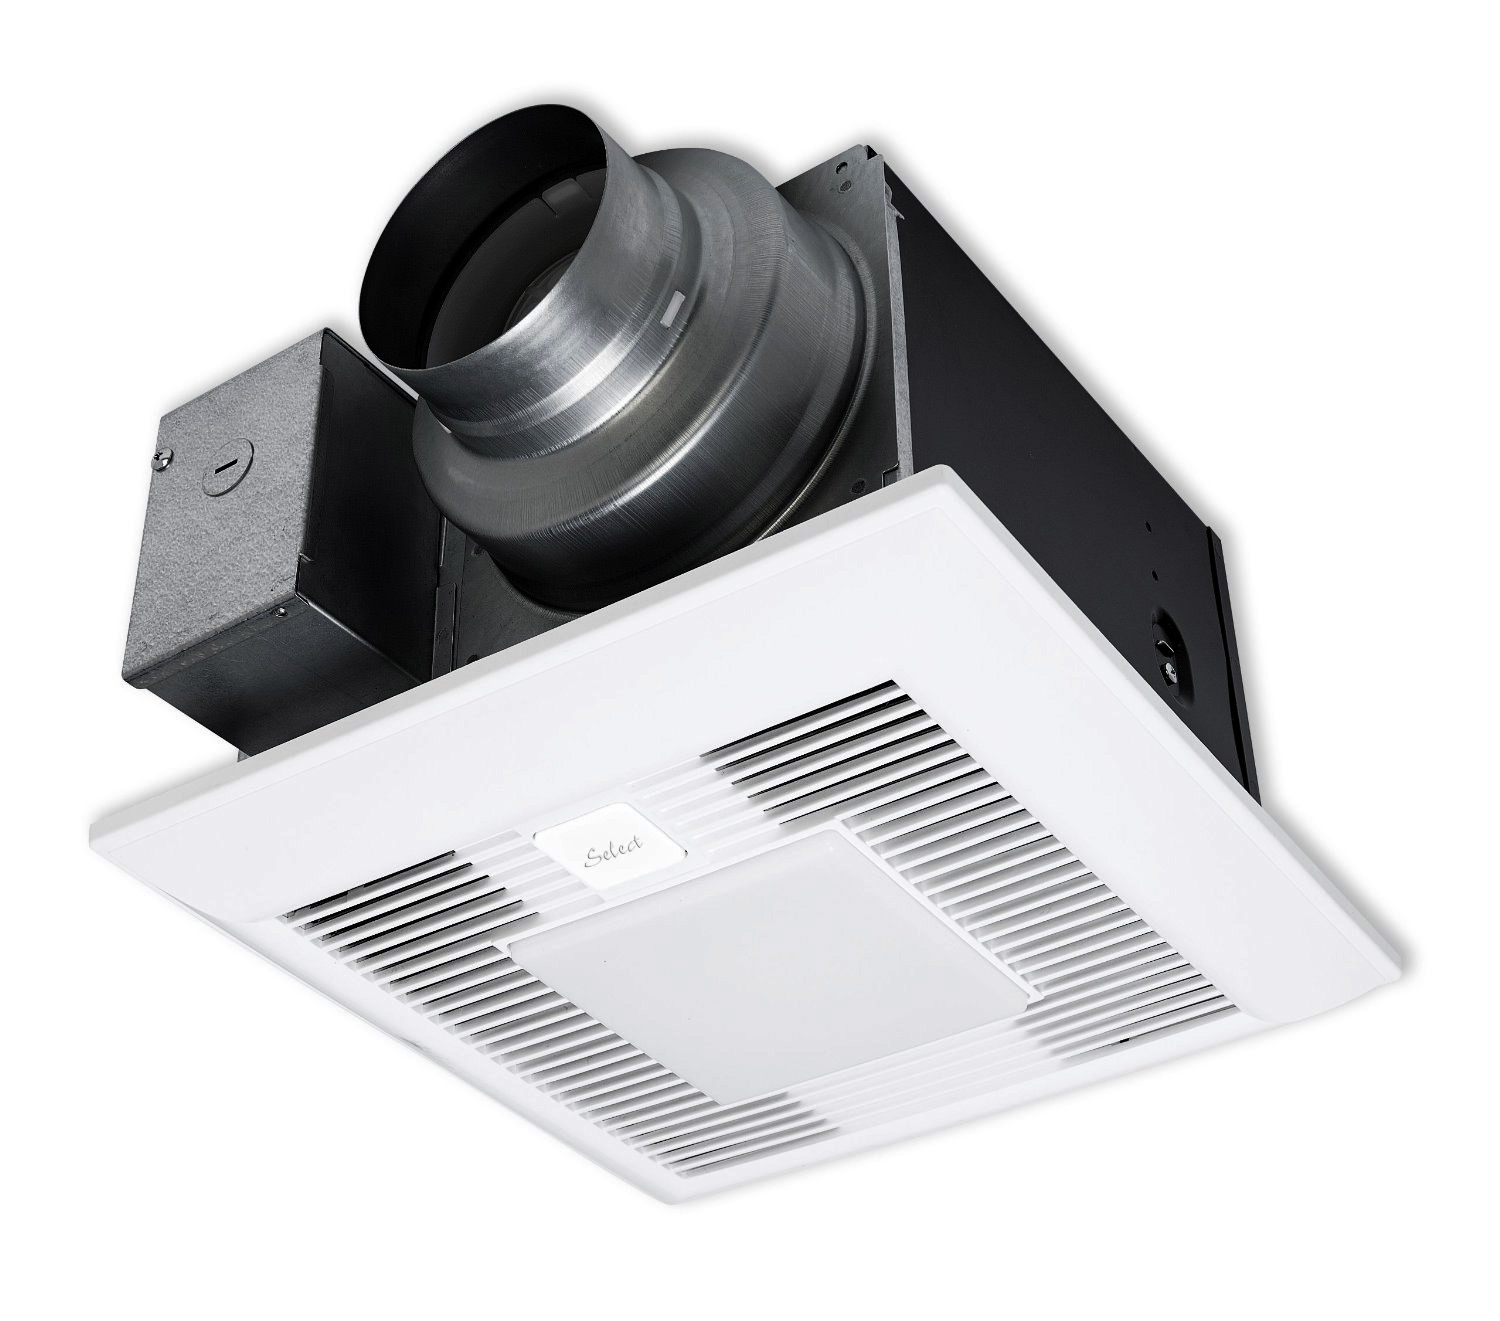 Panasonic Fans - WhisperGreen Select - FV-1115VKL2 Bathroom Exhaust Fan - 110-130-150 CFM - Single Speed - 6" Duct - LED Light - Click Image to Close